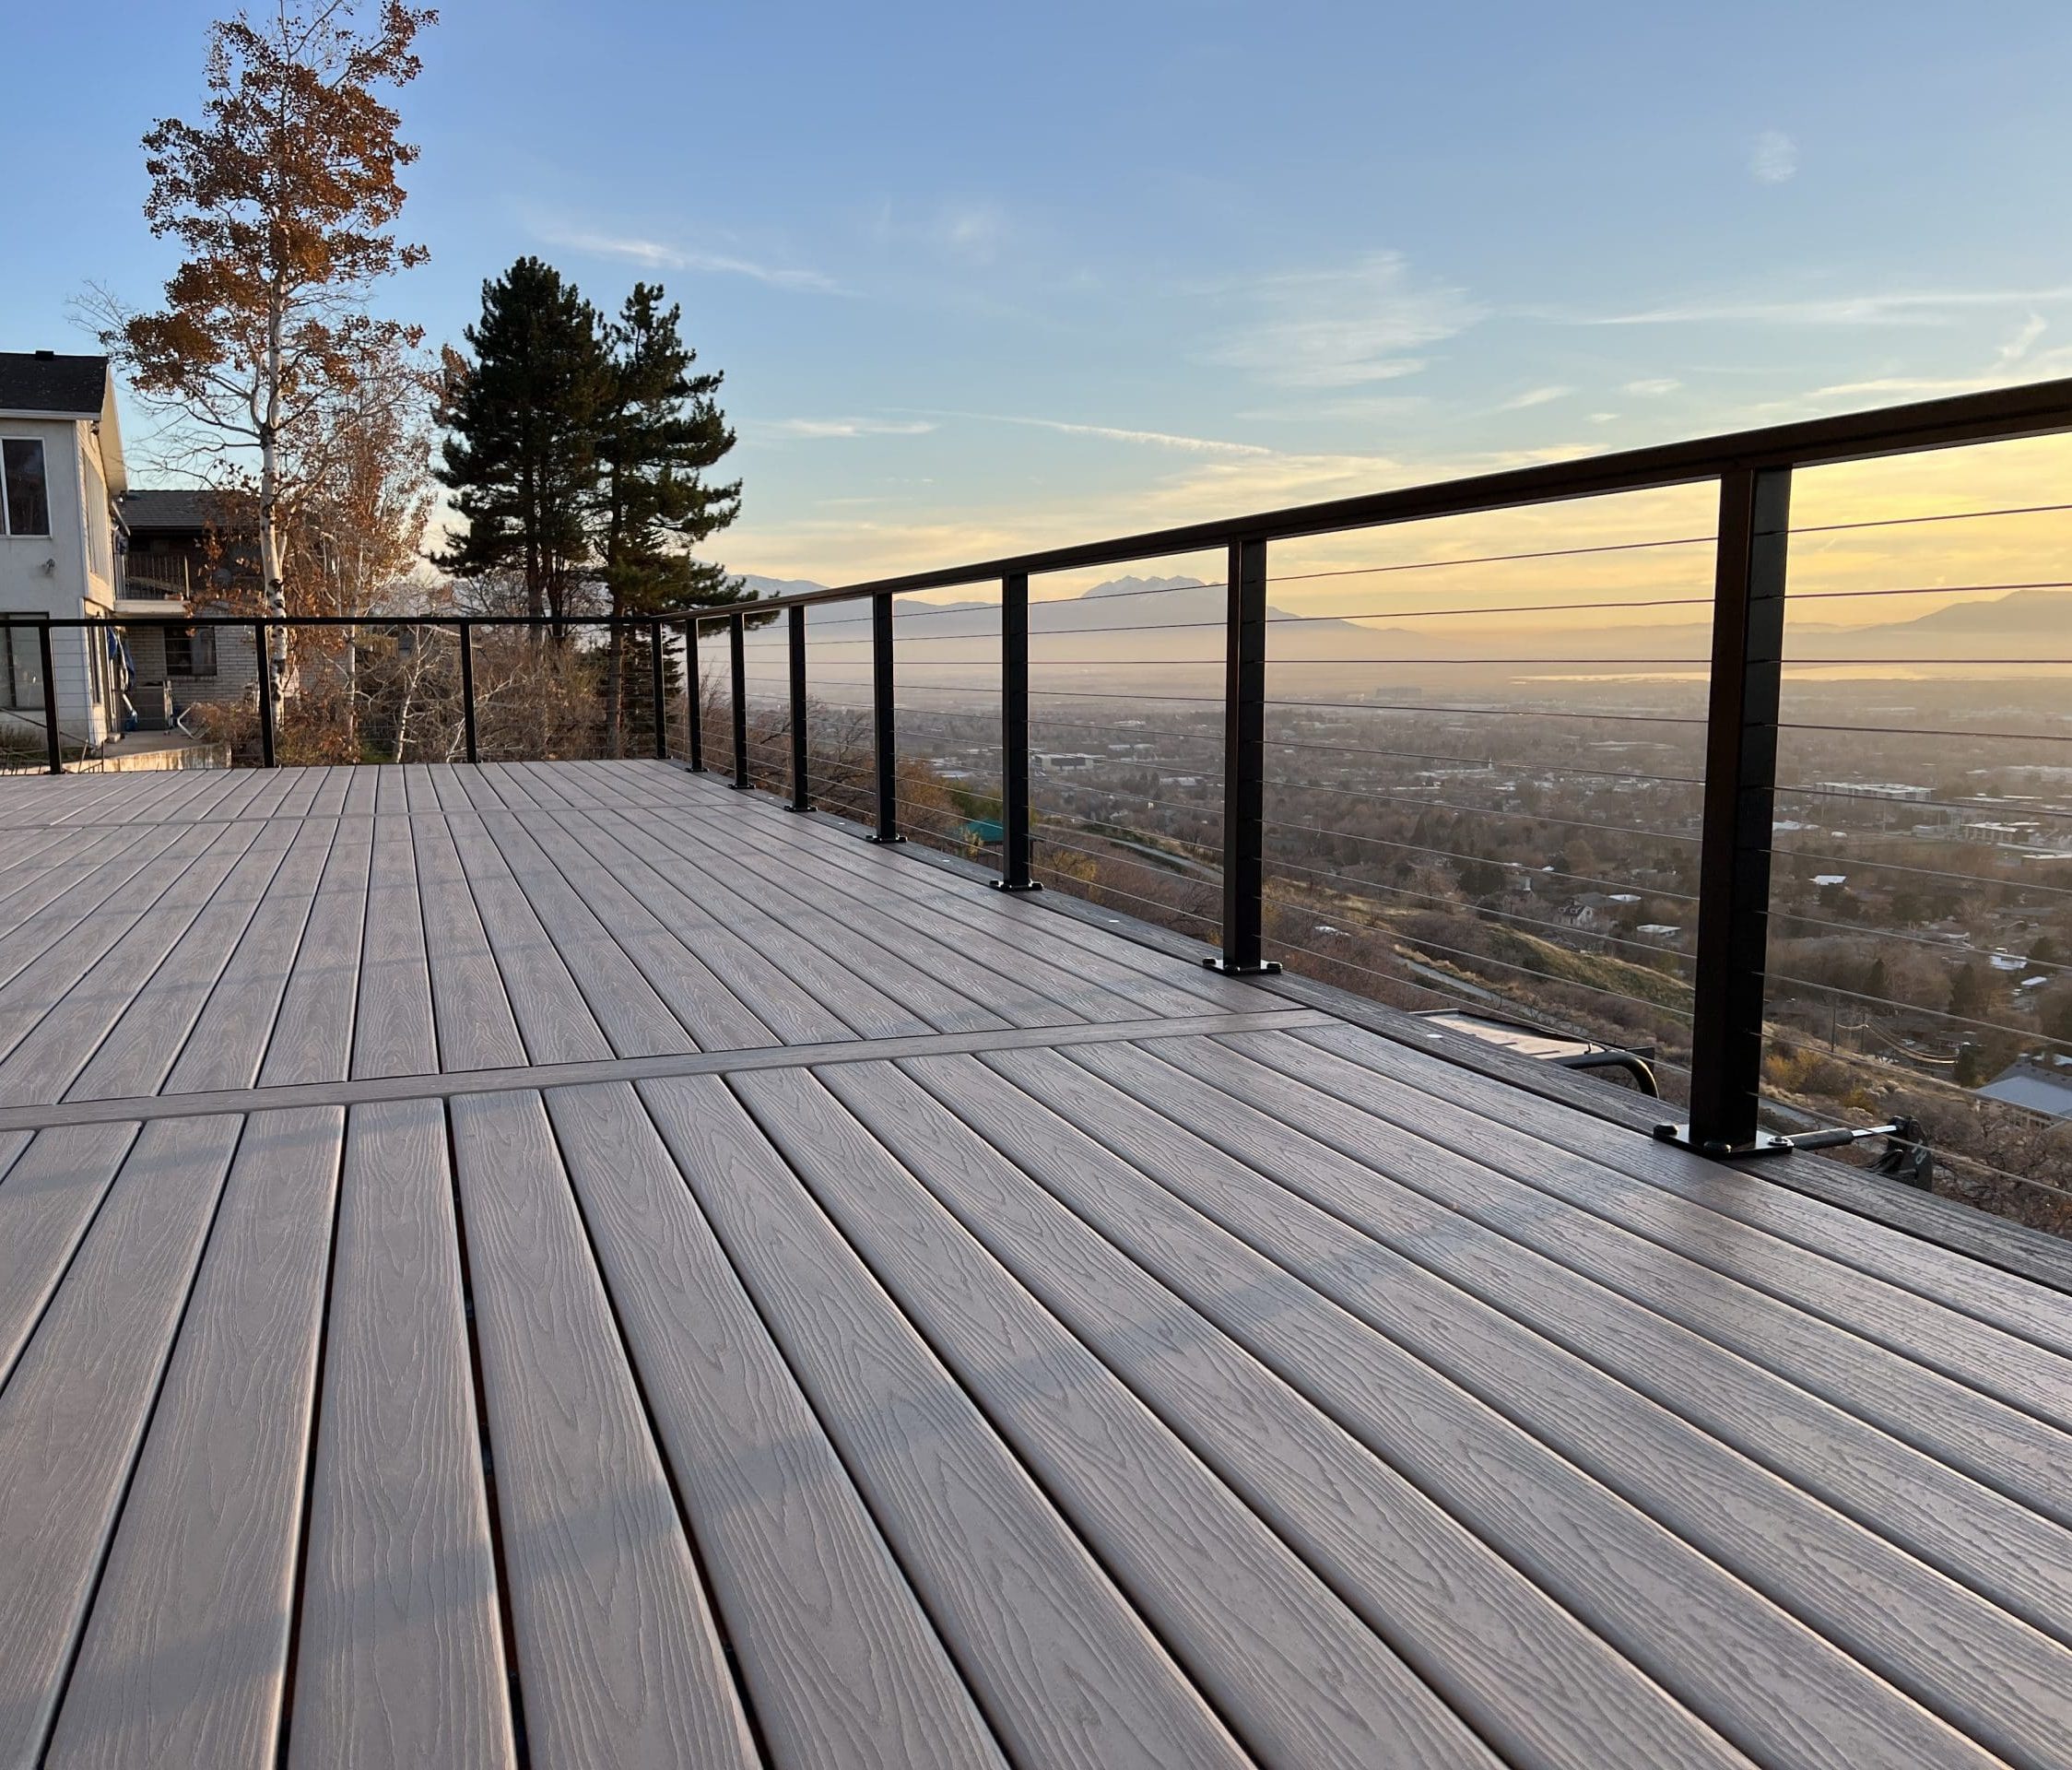 Transform your space with a Millcreek, Utah deck built by the experts at Blackrock Decks. Contact us today for a quote on your project.